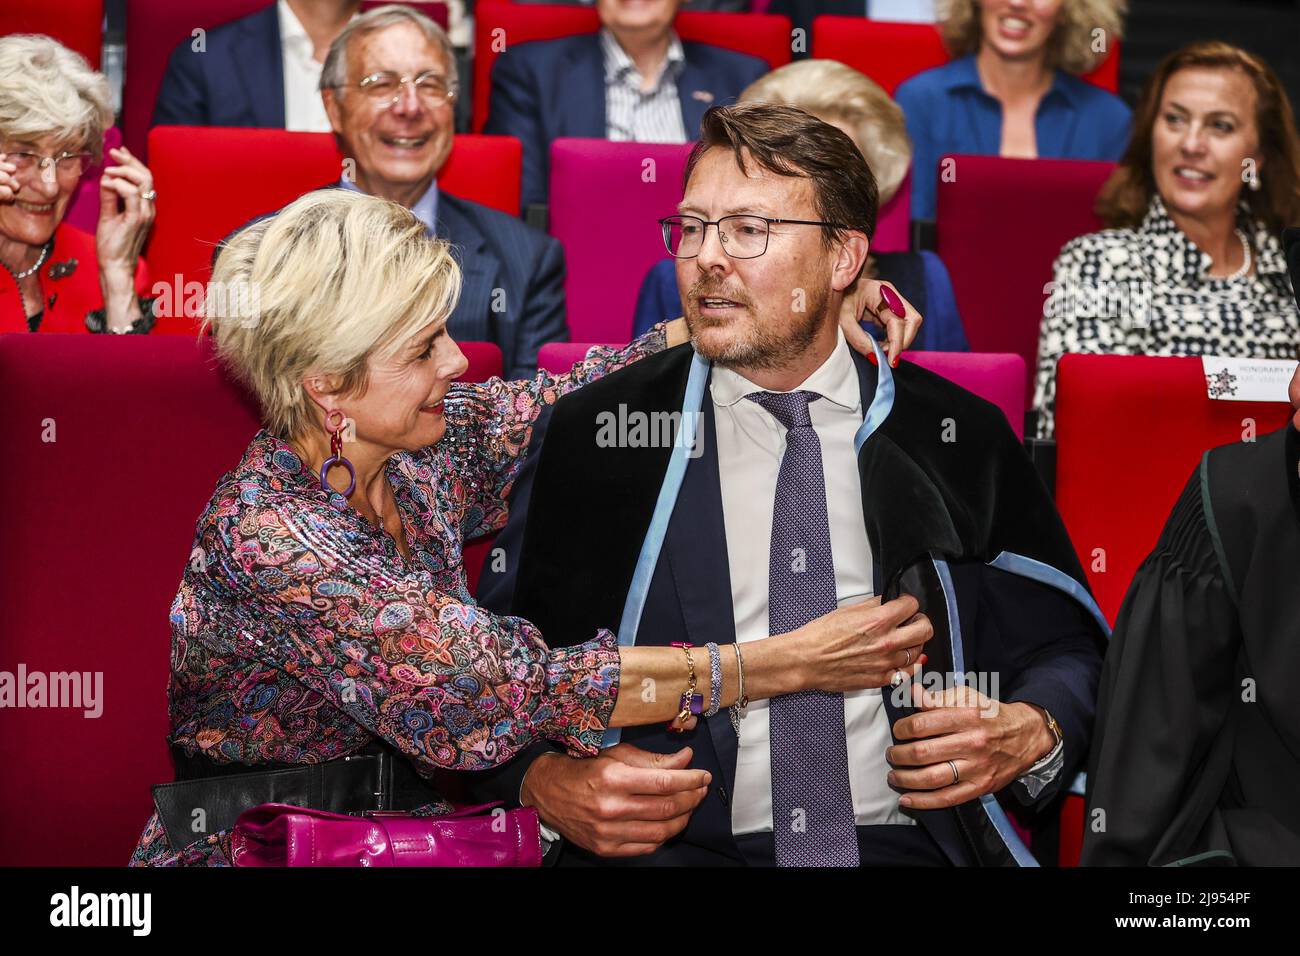 2022-05-20 16:42:00 ENSCHEDE - Princess Laurentien corrects the kappa of  Prince Constantijn after receiving an honorary doctorate at the University  of Twente, which is celebrating her 60th birthday. In the background Jantien